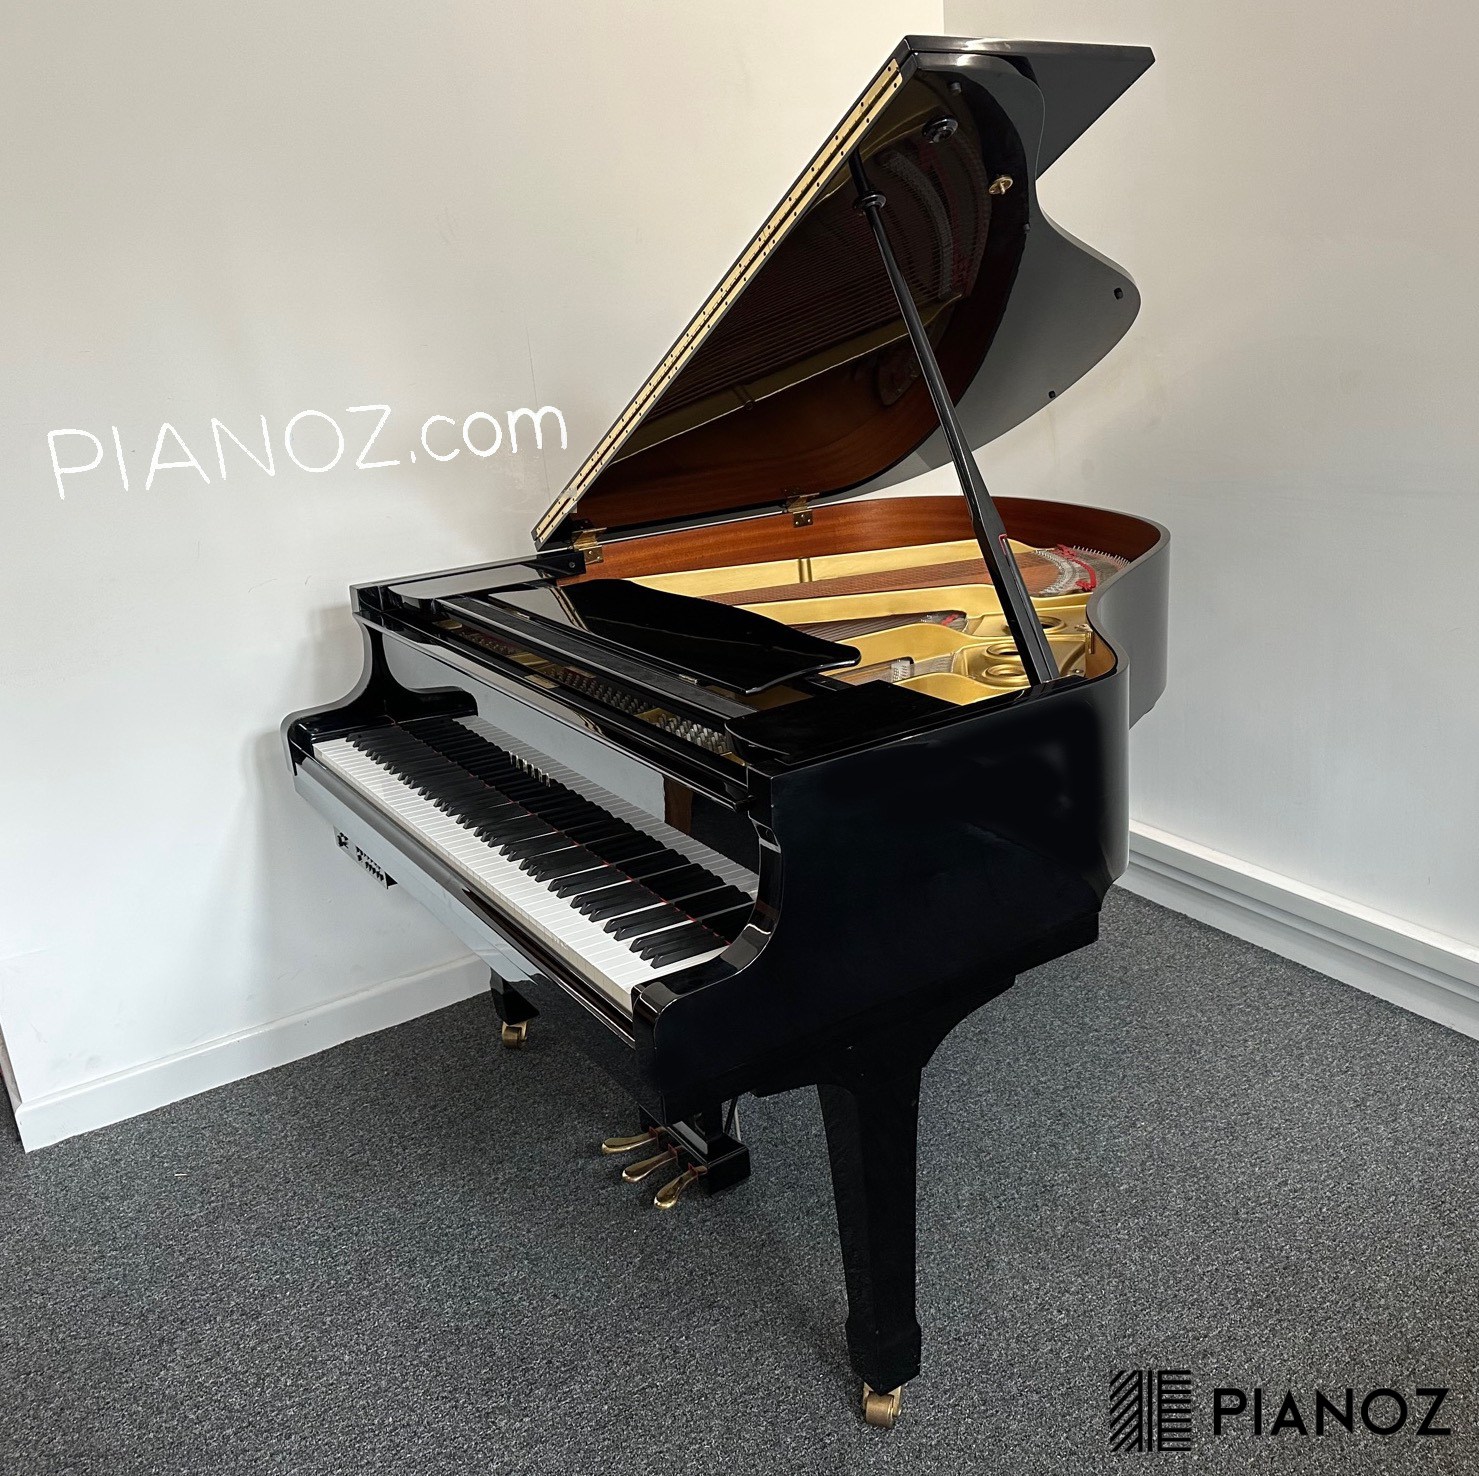 Yamaha G1 (C1) Silent Baby Grand Piano piano for sale in UK